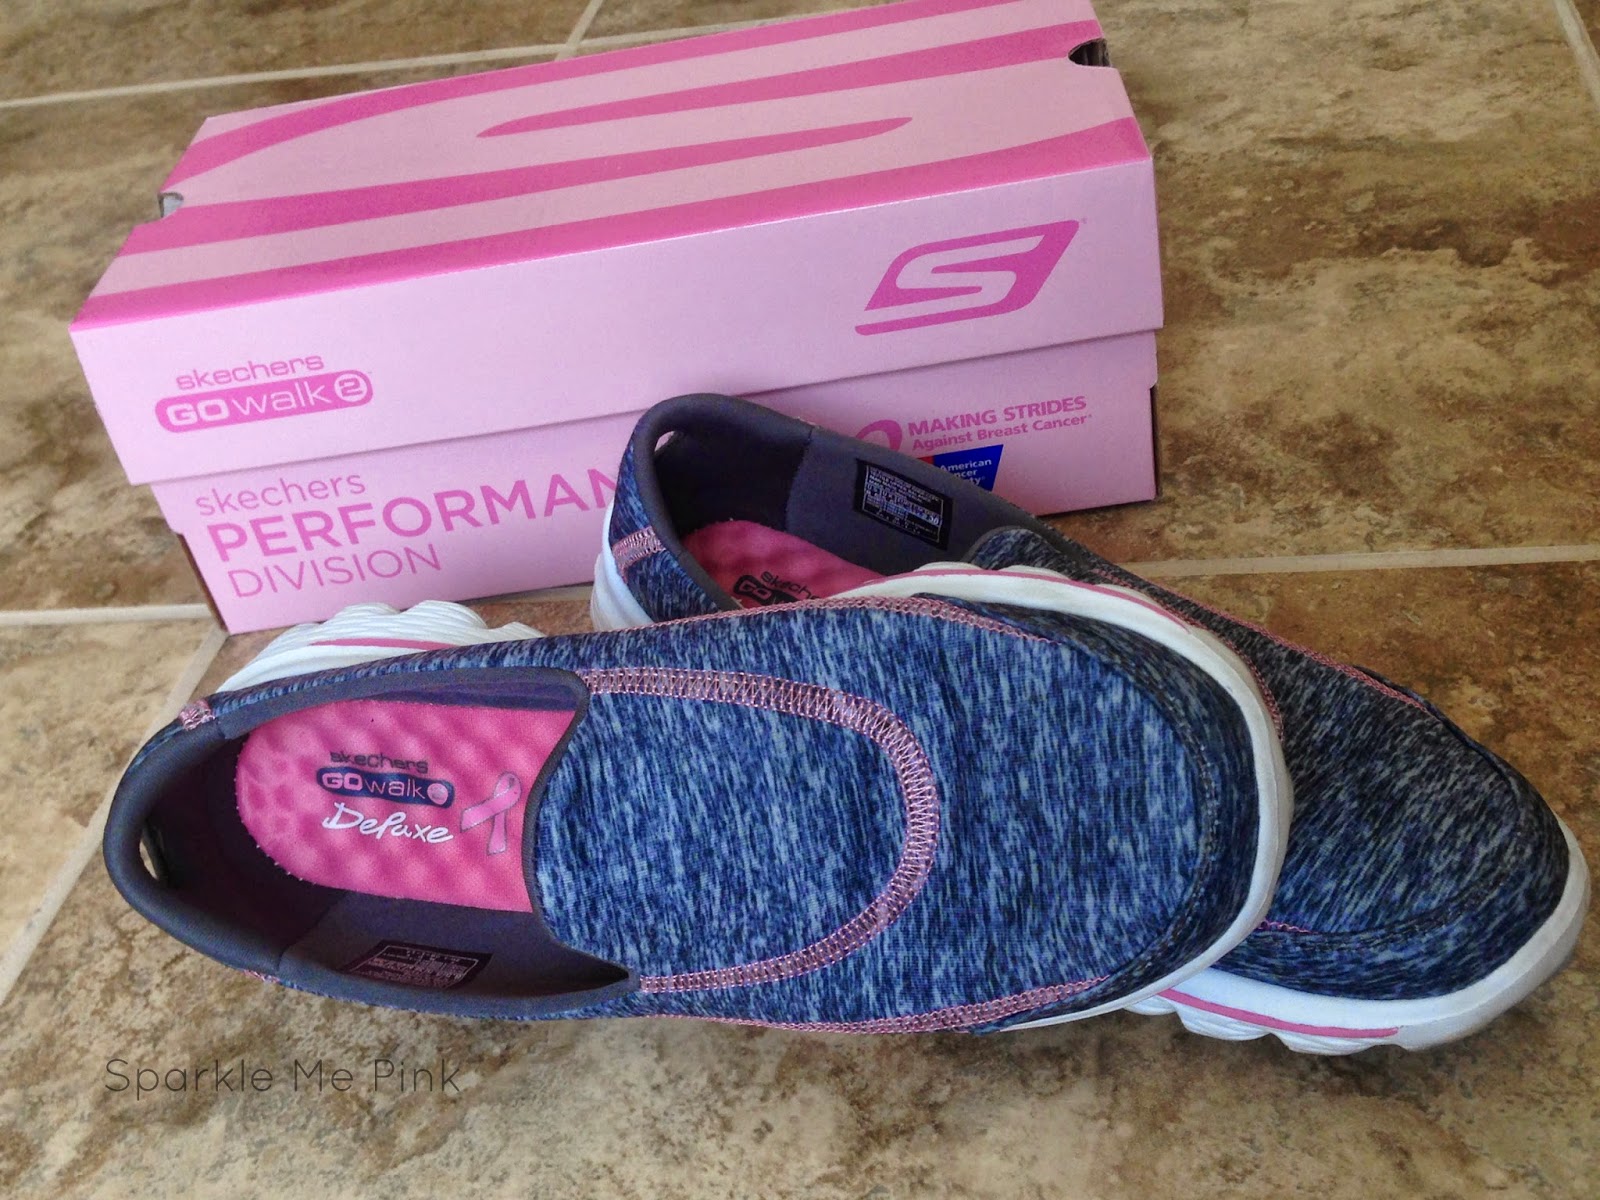 skechers american cancer society